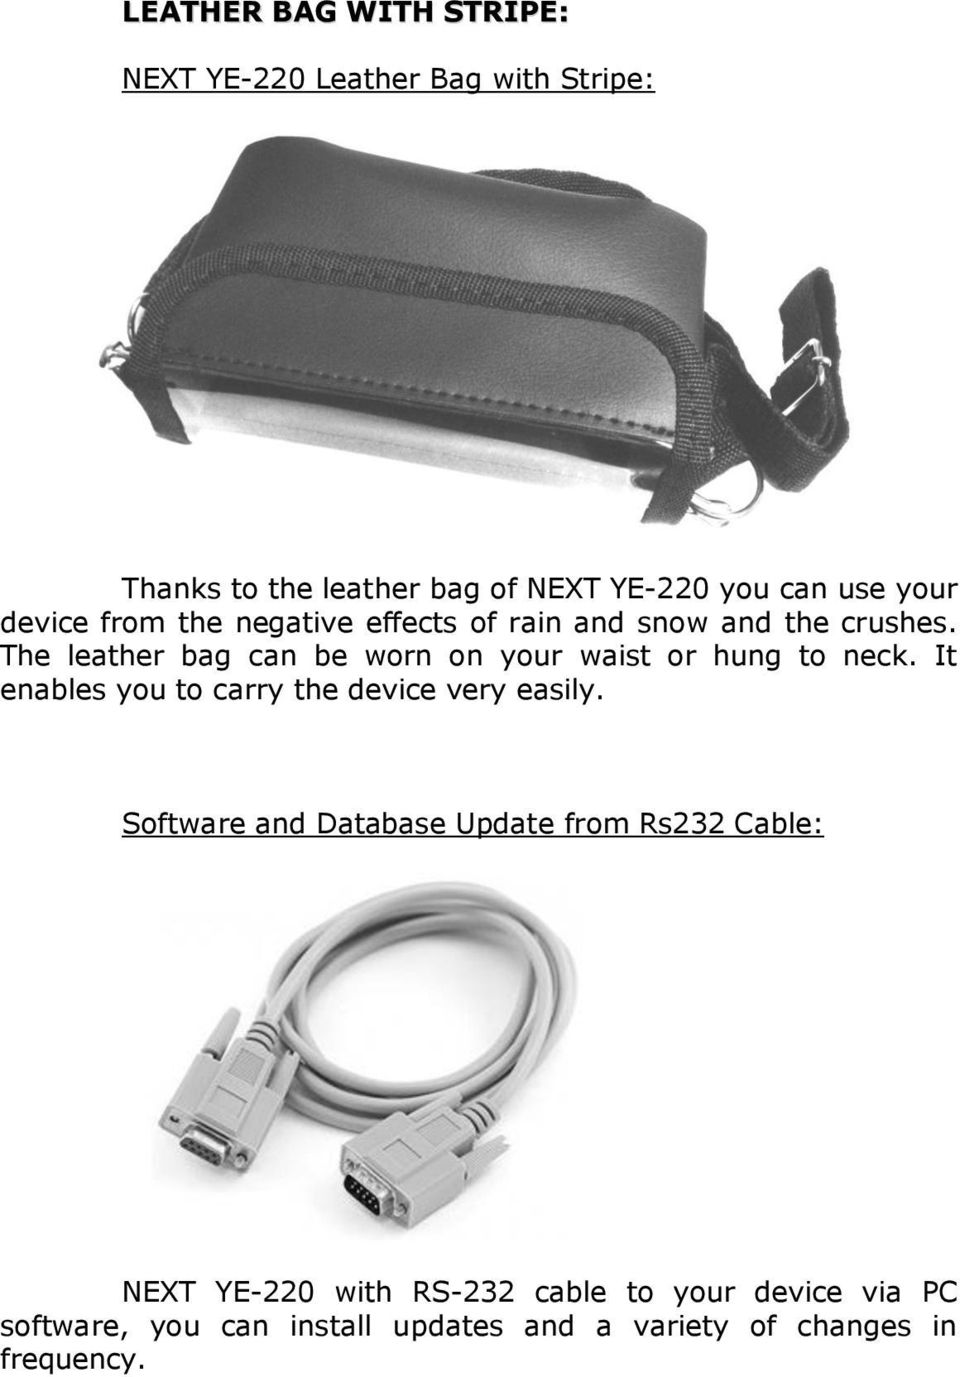 The leather bag can be worn on your waist or hung to neck. It enables you to carry the device very easily.